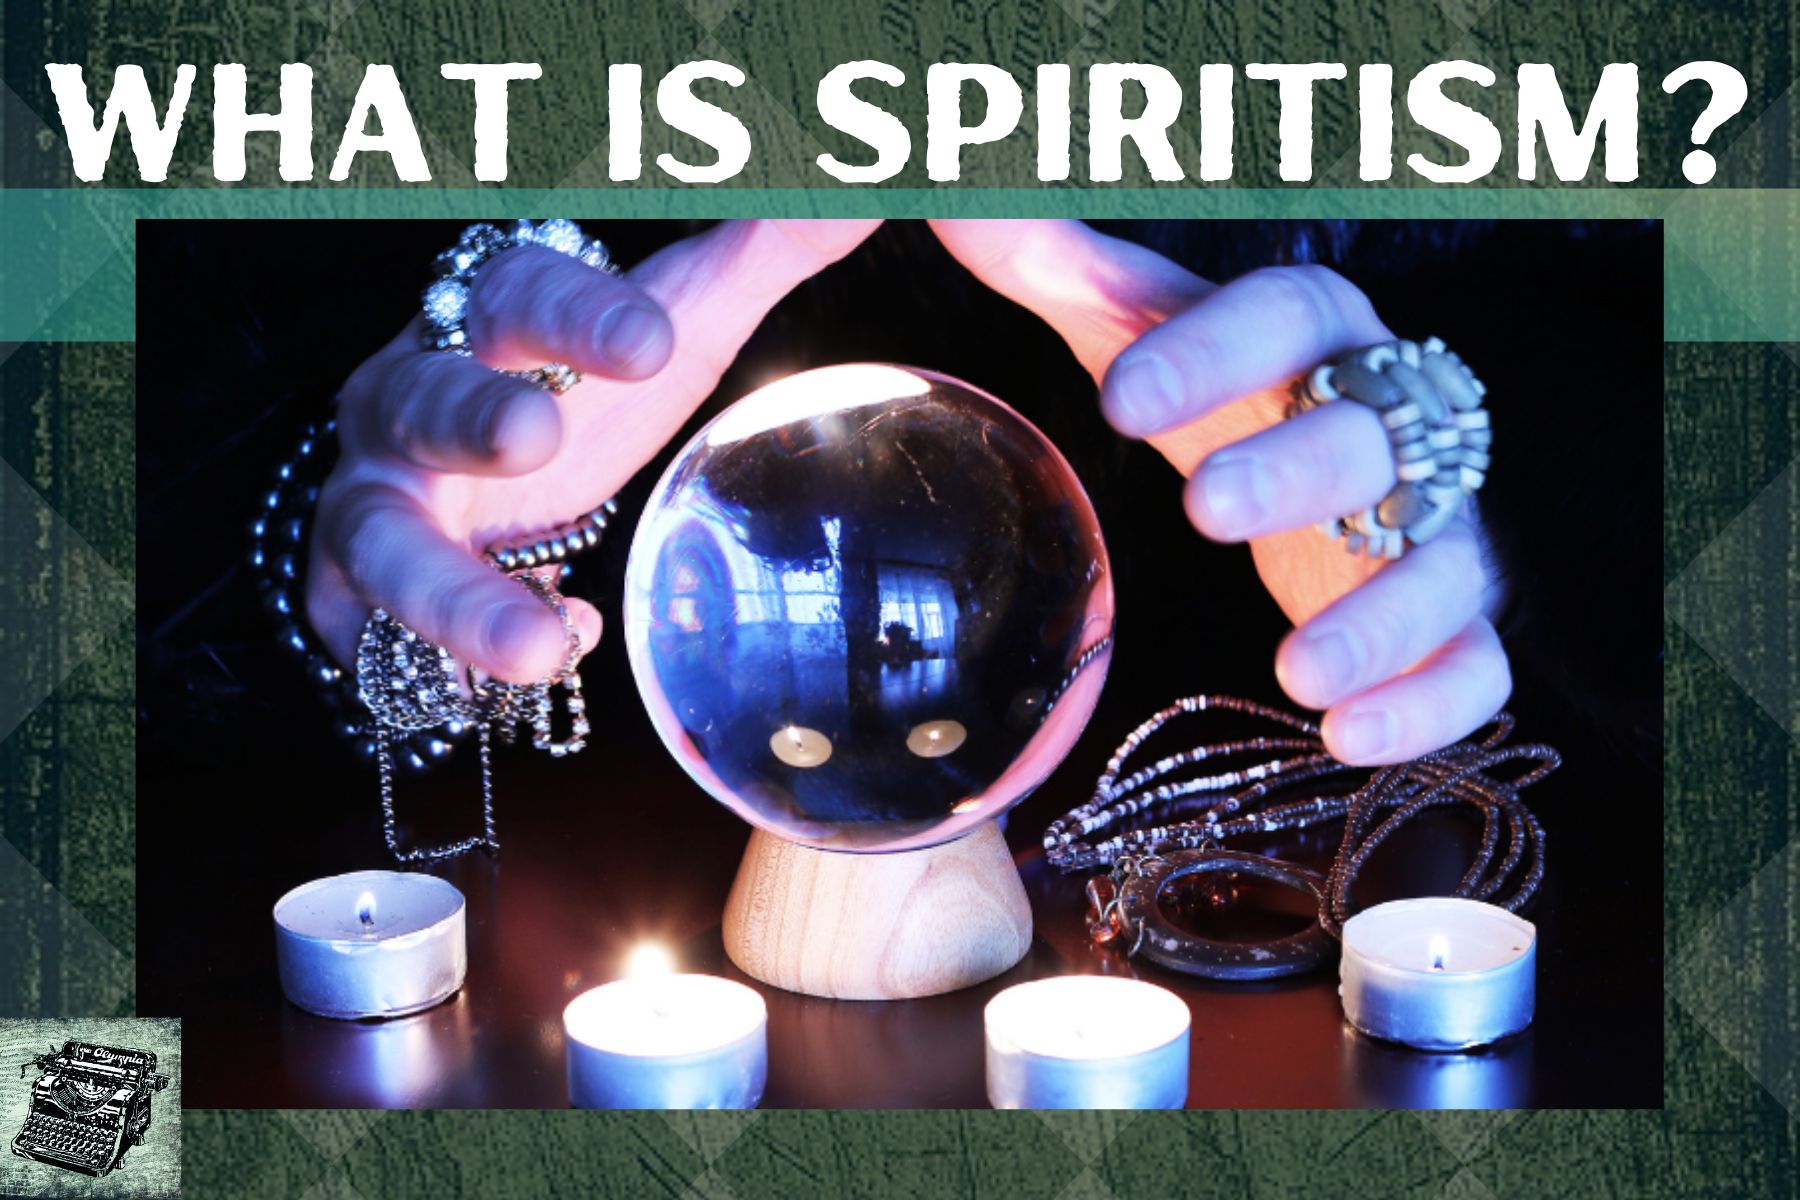 In a nutshell - Spiritualism Is A Spiritual Belief System With 3 Branches; Religion, Philosophy And Science.